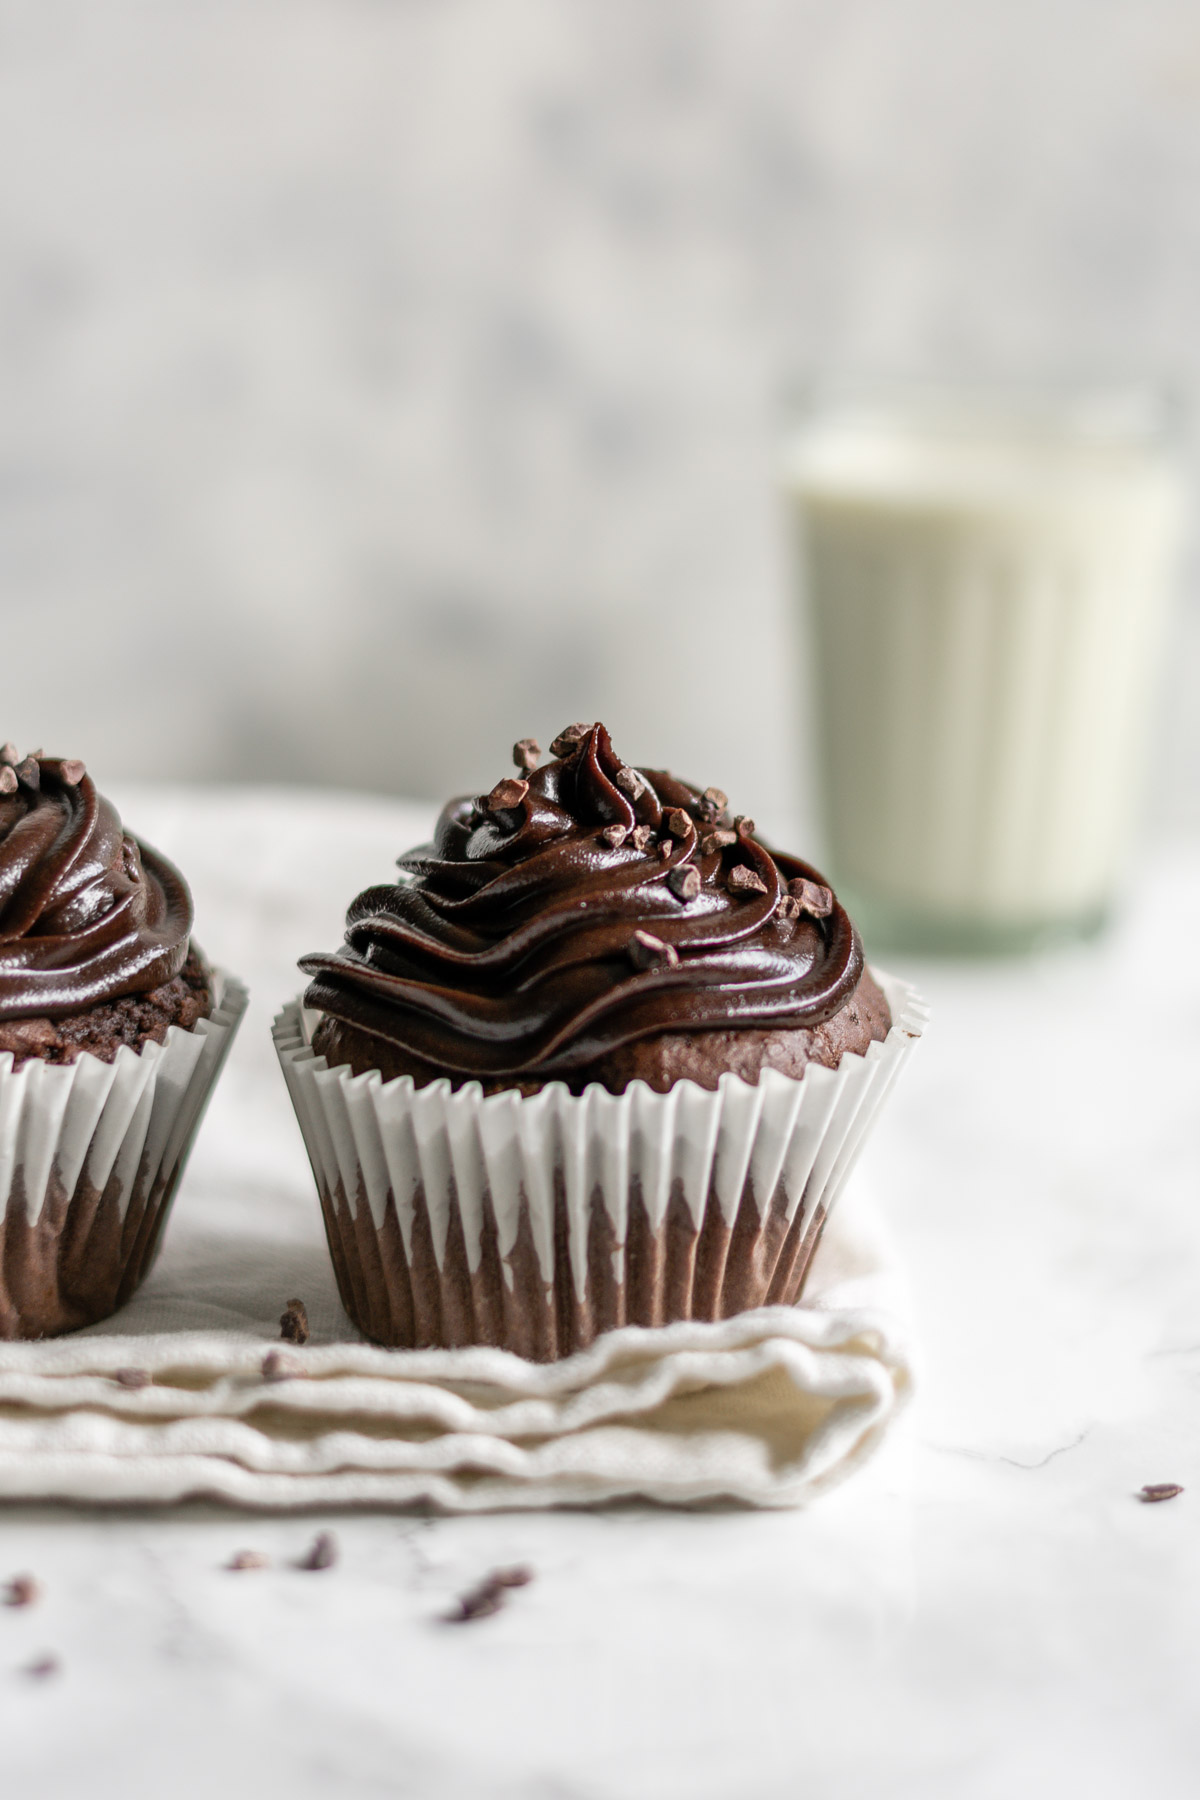 a chocolate cupcake and a glass of milk